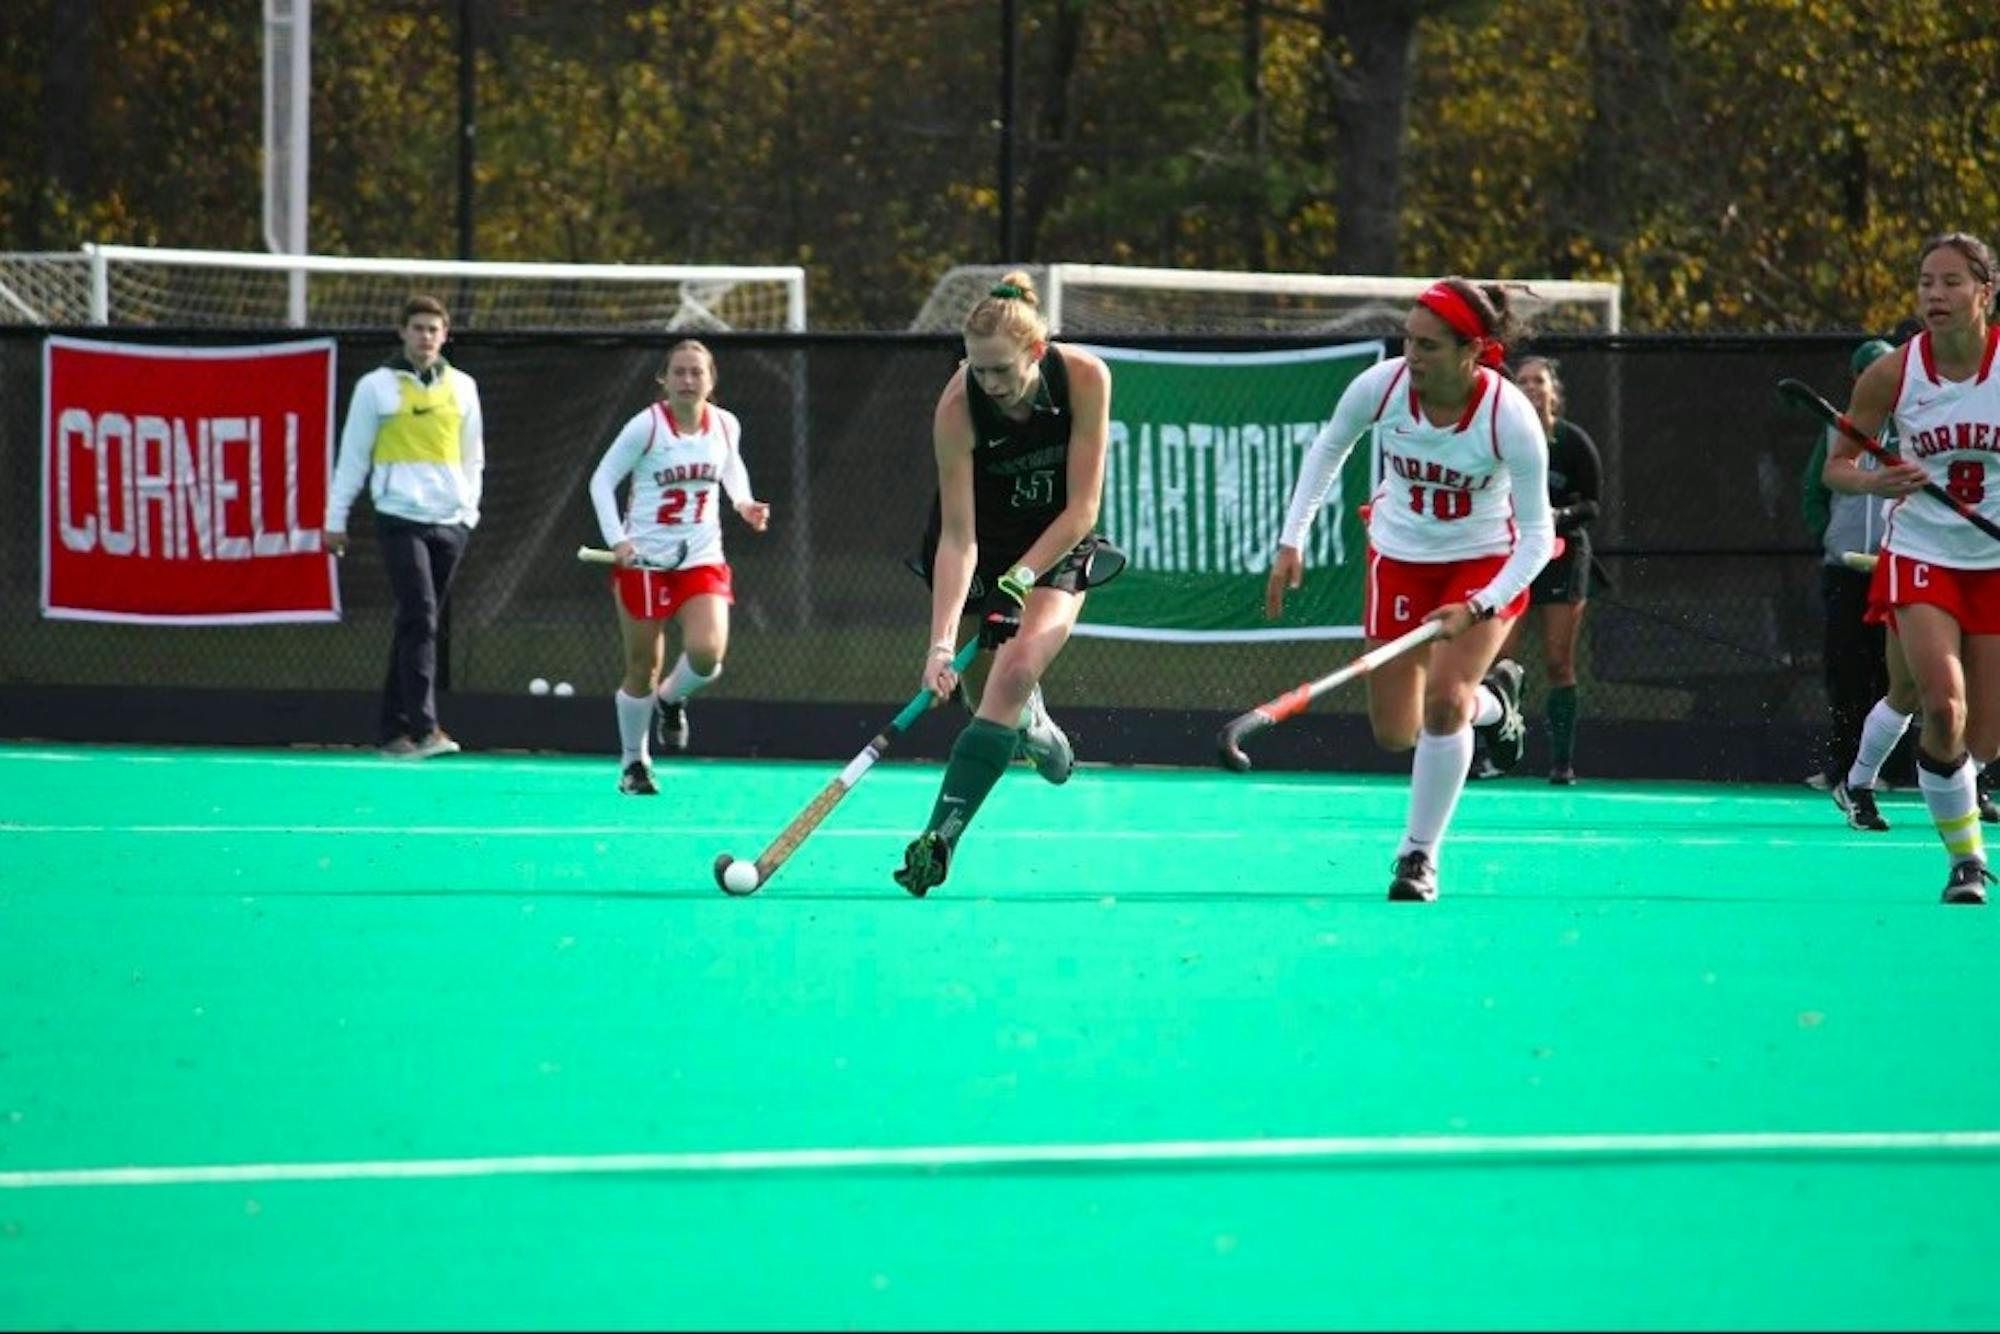 In 2017, Katie Spanos ’20 earned a spot on the All-Ivy League Second Team.